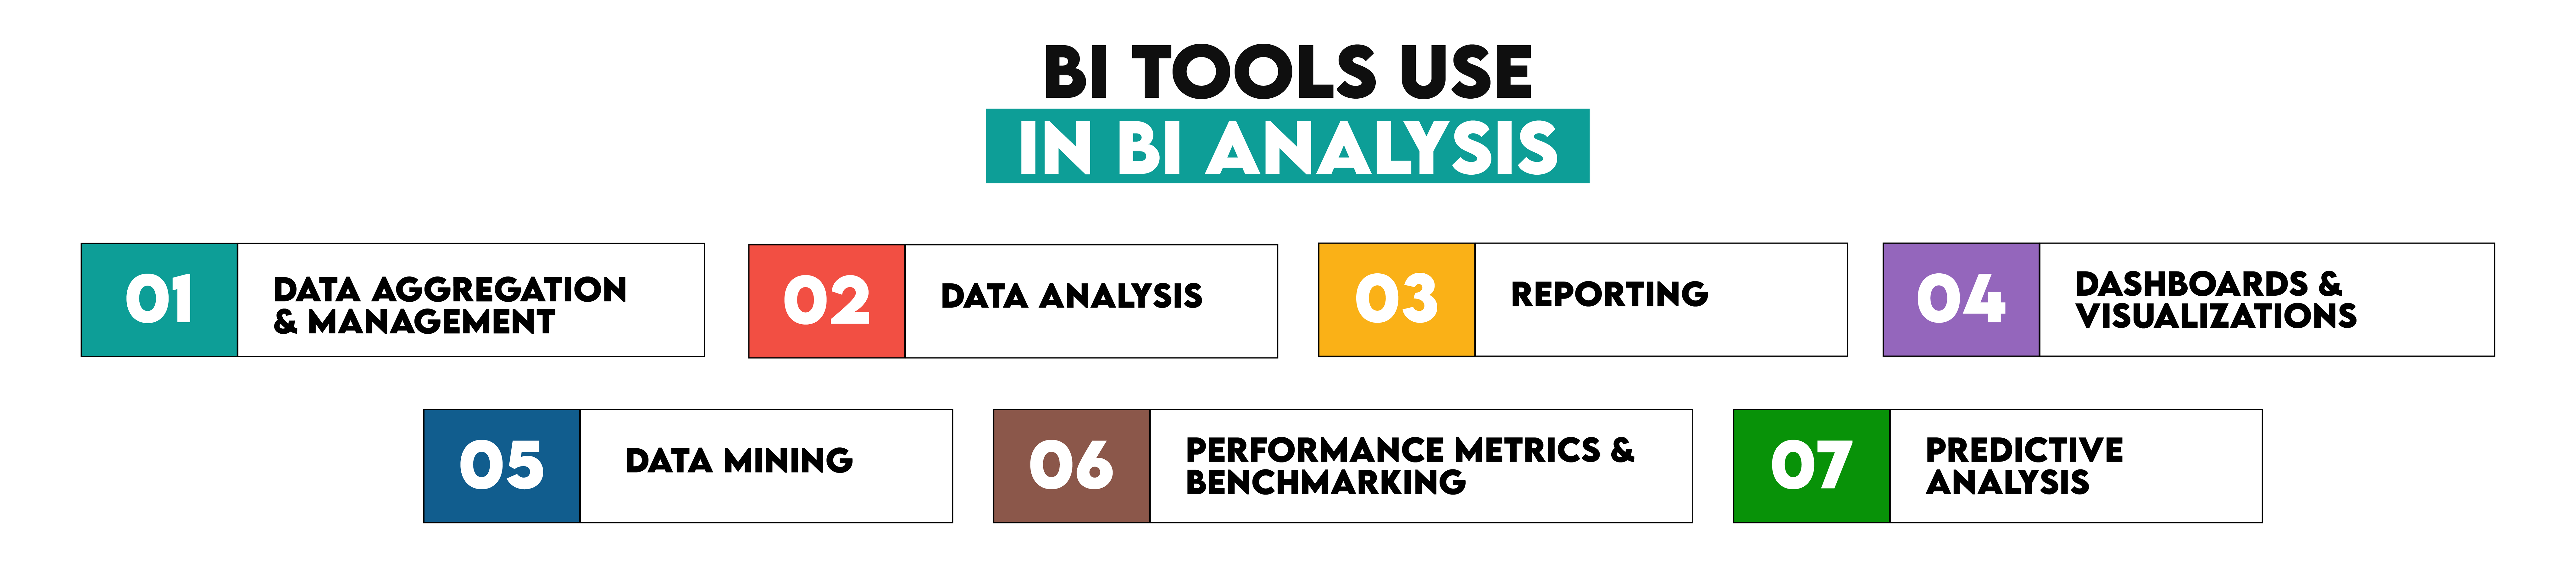 Business Intelligence Skills required for BI Analysts